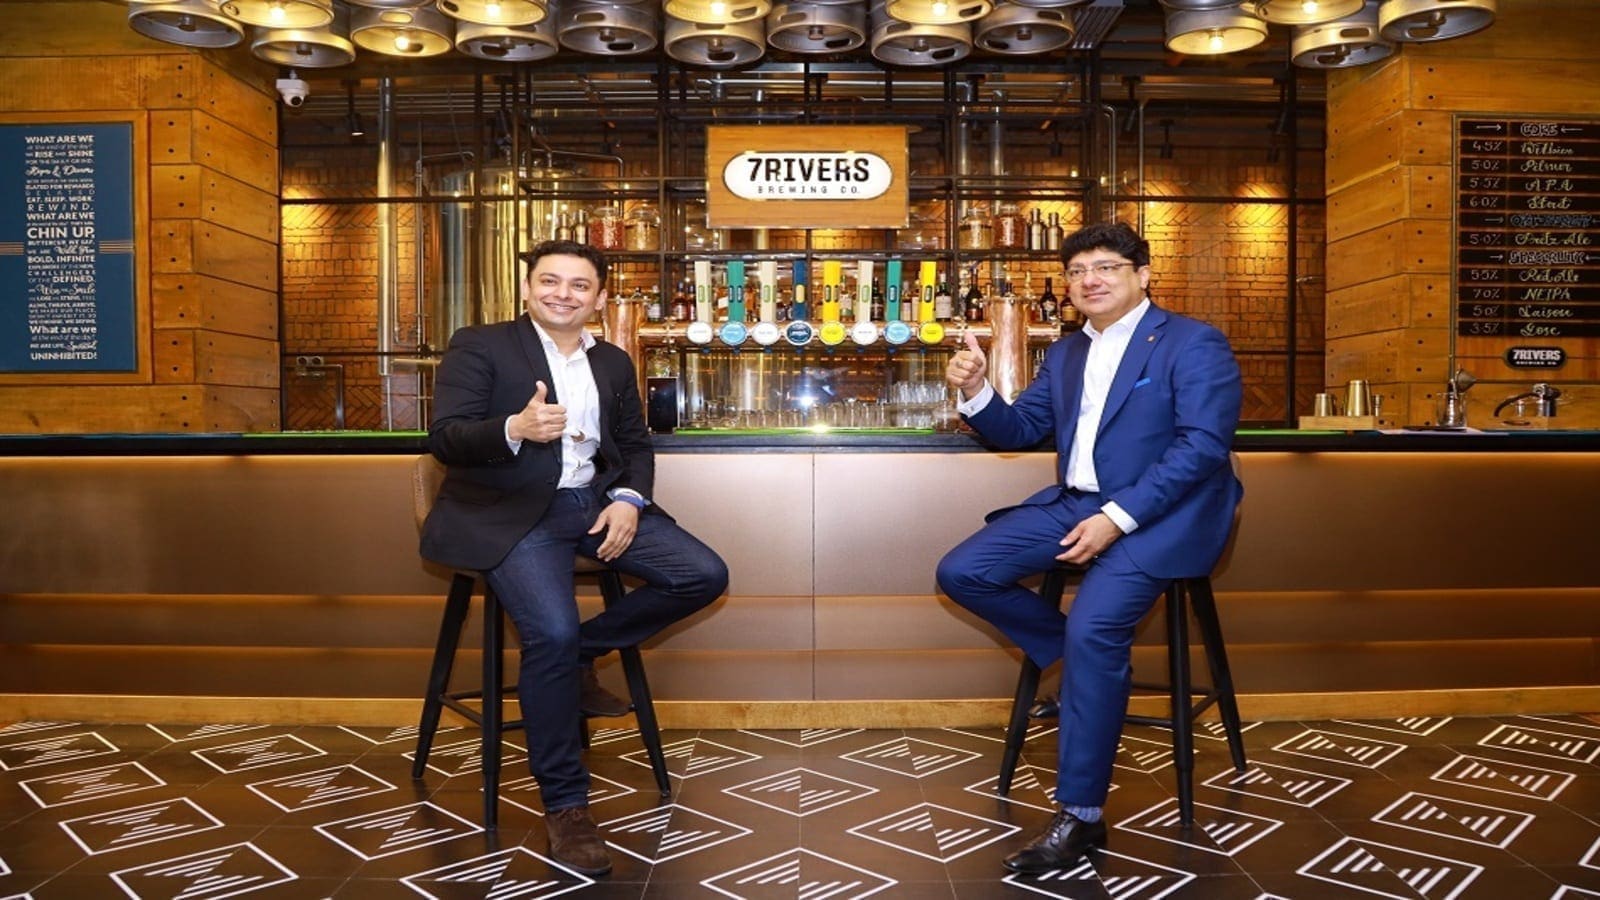 AB InBev, IHCL jointly open first microbrewery dubbed 7Rivers Brewpub in India